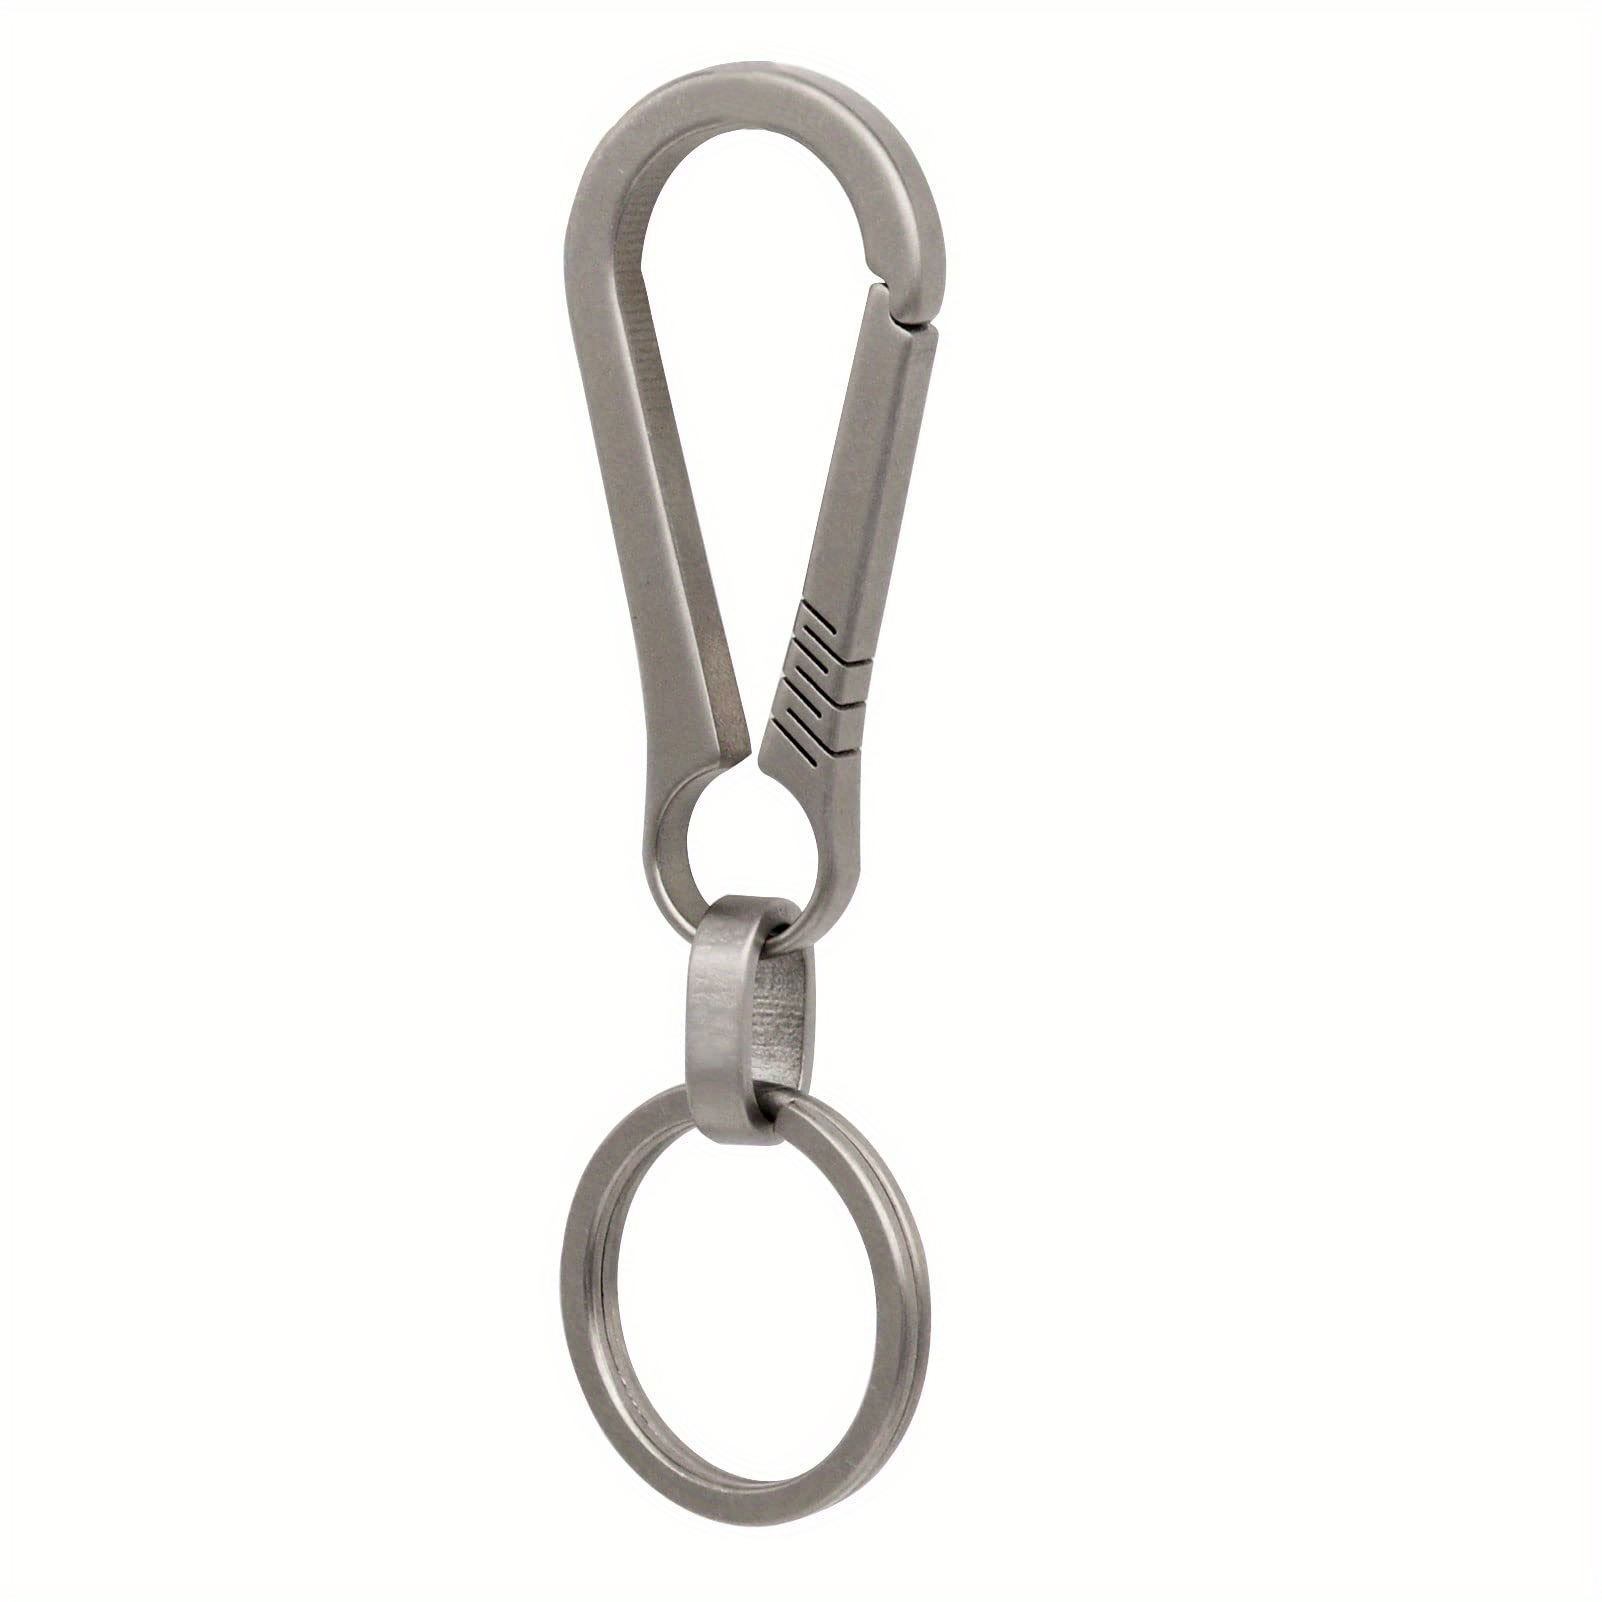 Titanium Keychain Quick Release Key Chain Clip With 1 Key Ring